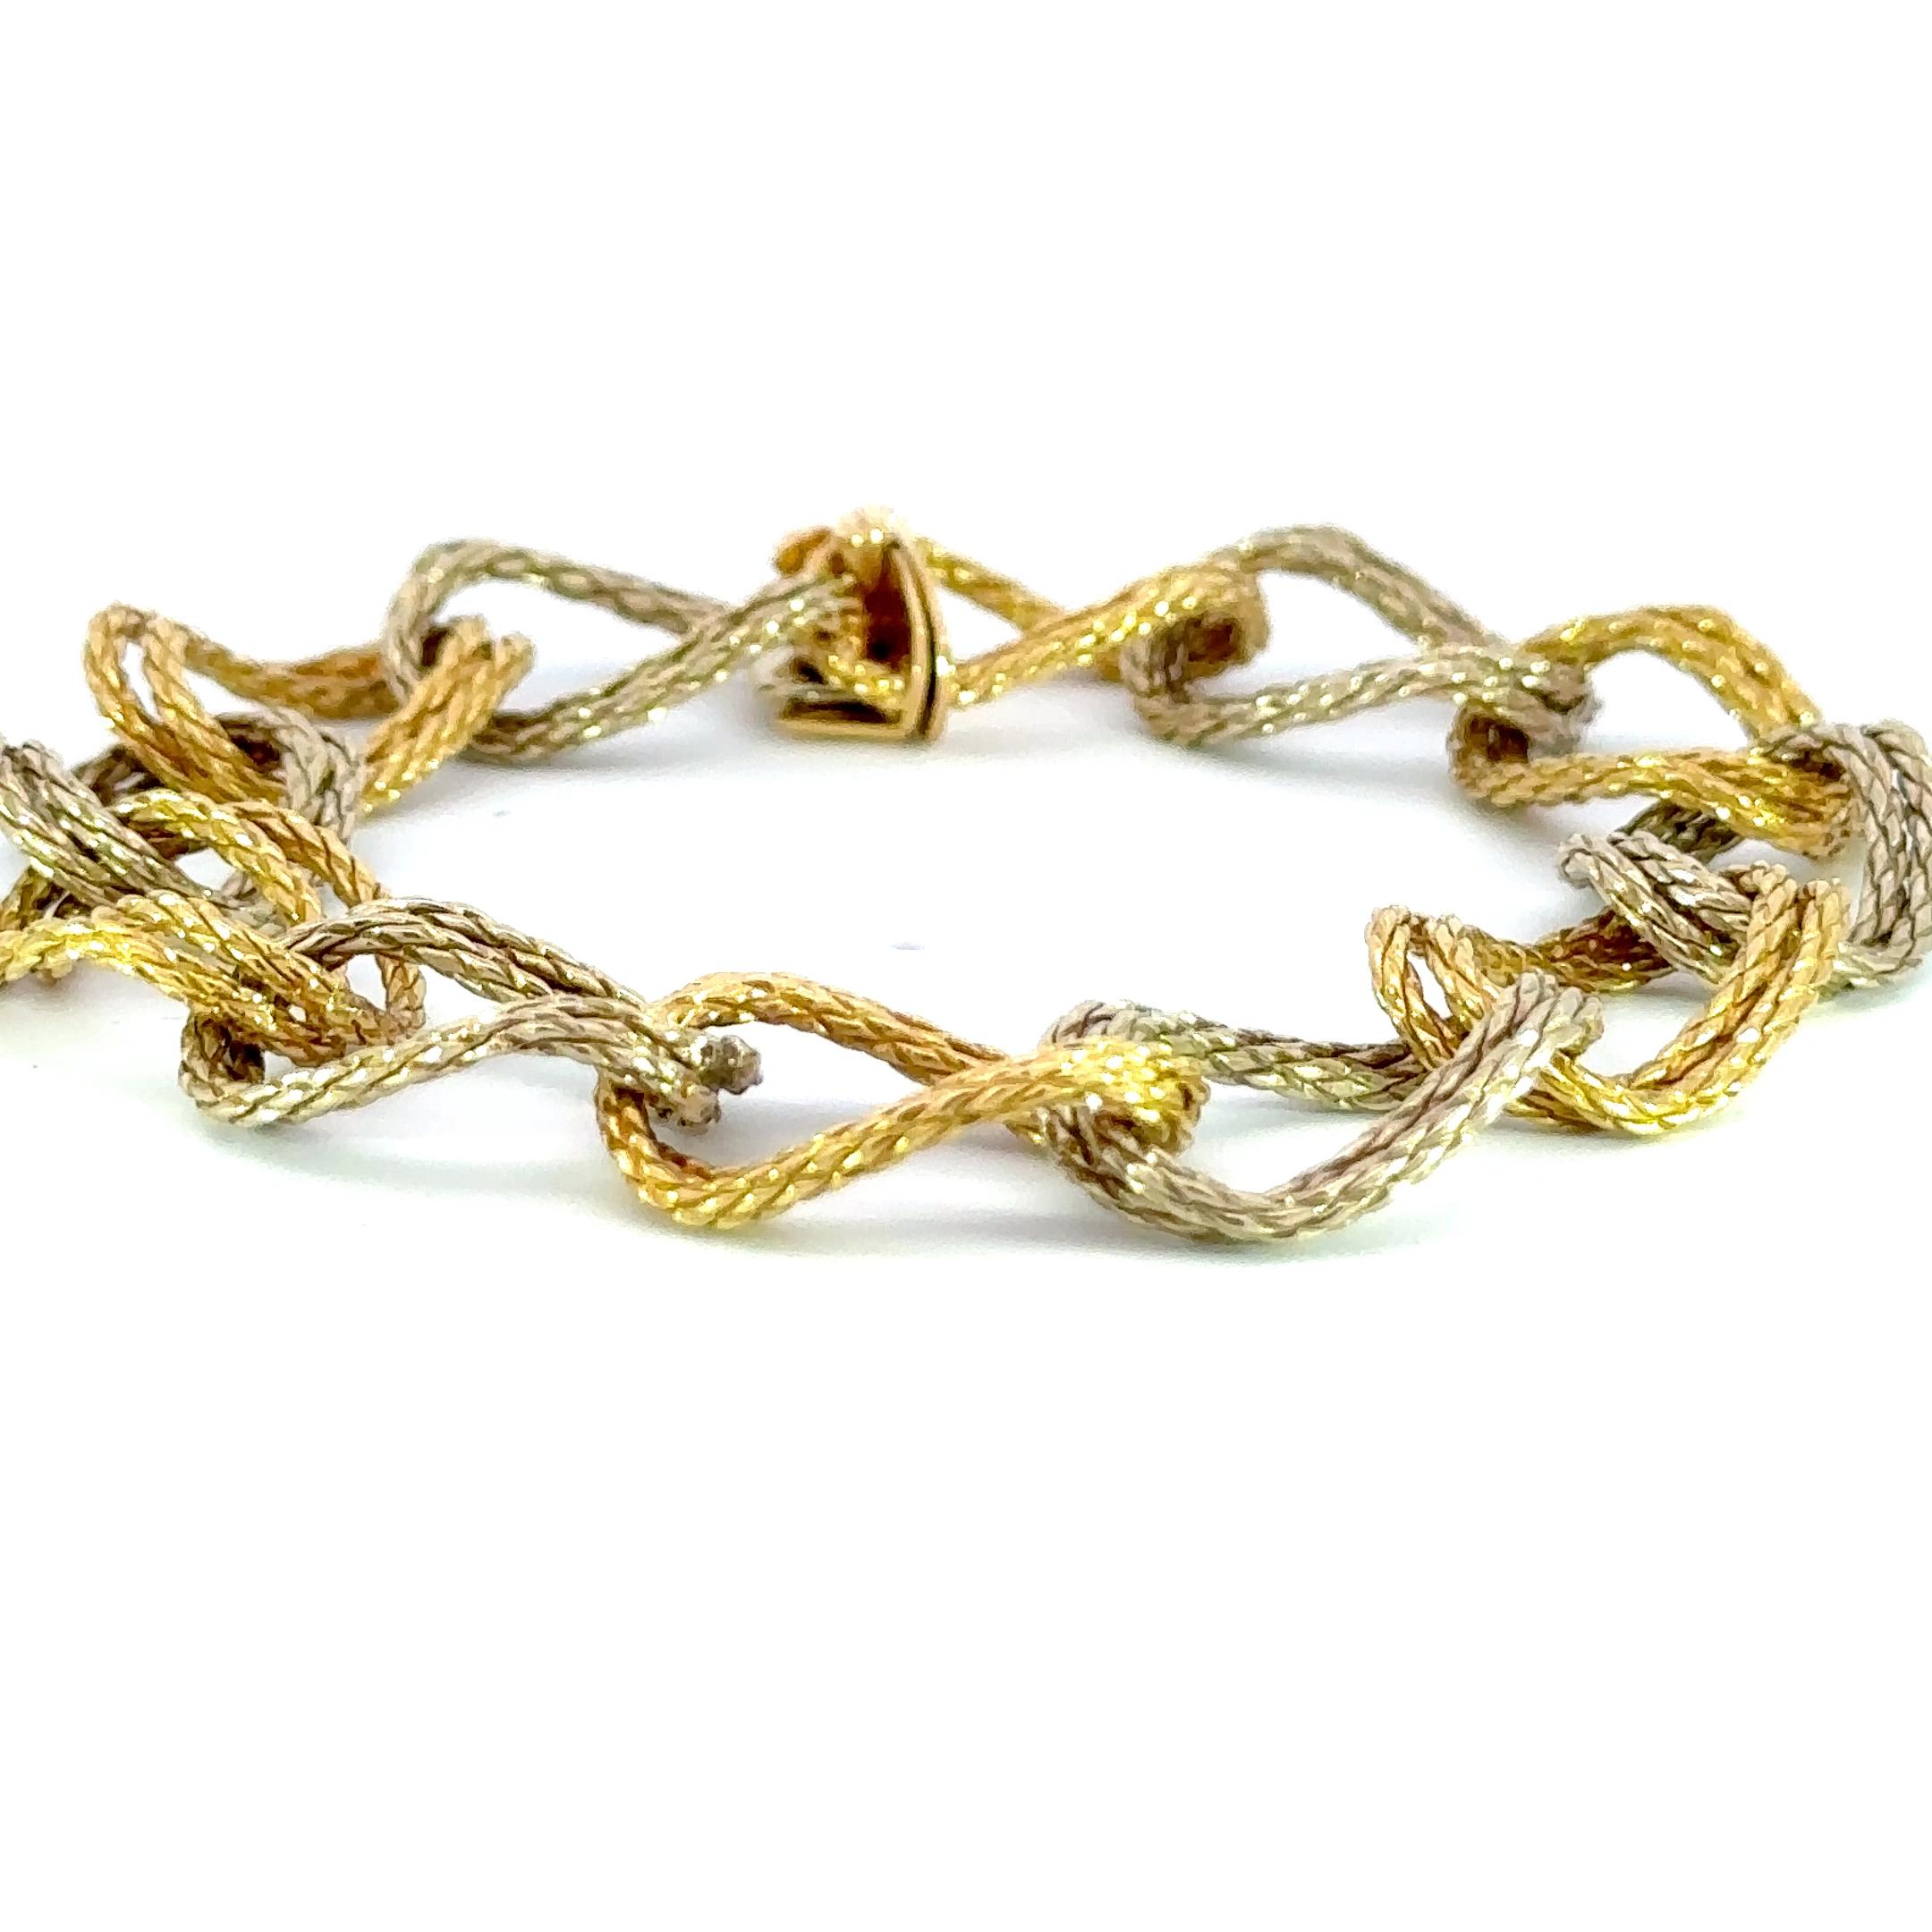 Bvlgari
Twisted Double Rope Link
18K White and Yellow Gold
24.5cm length
37g